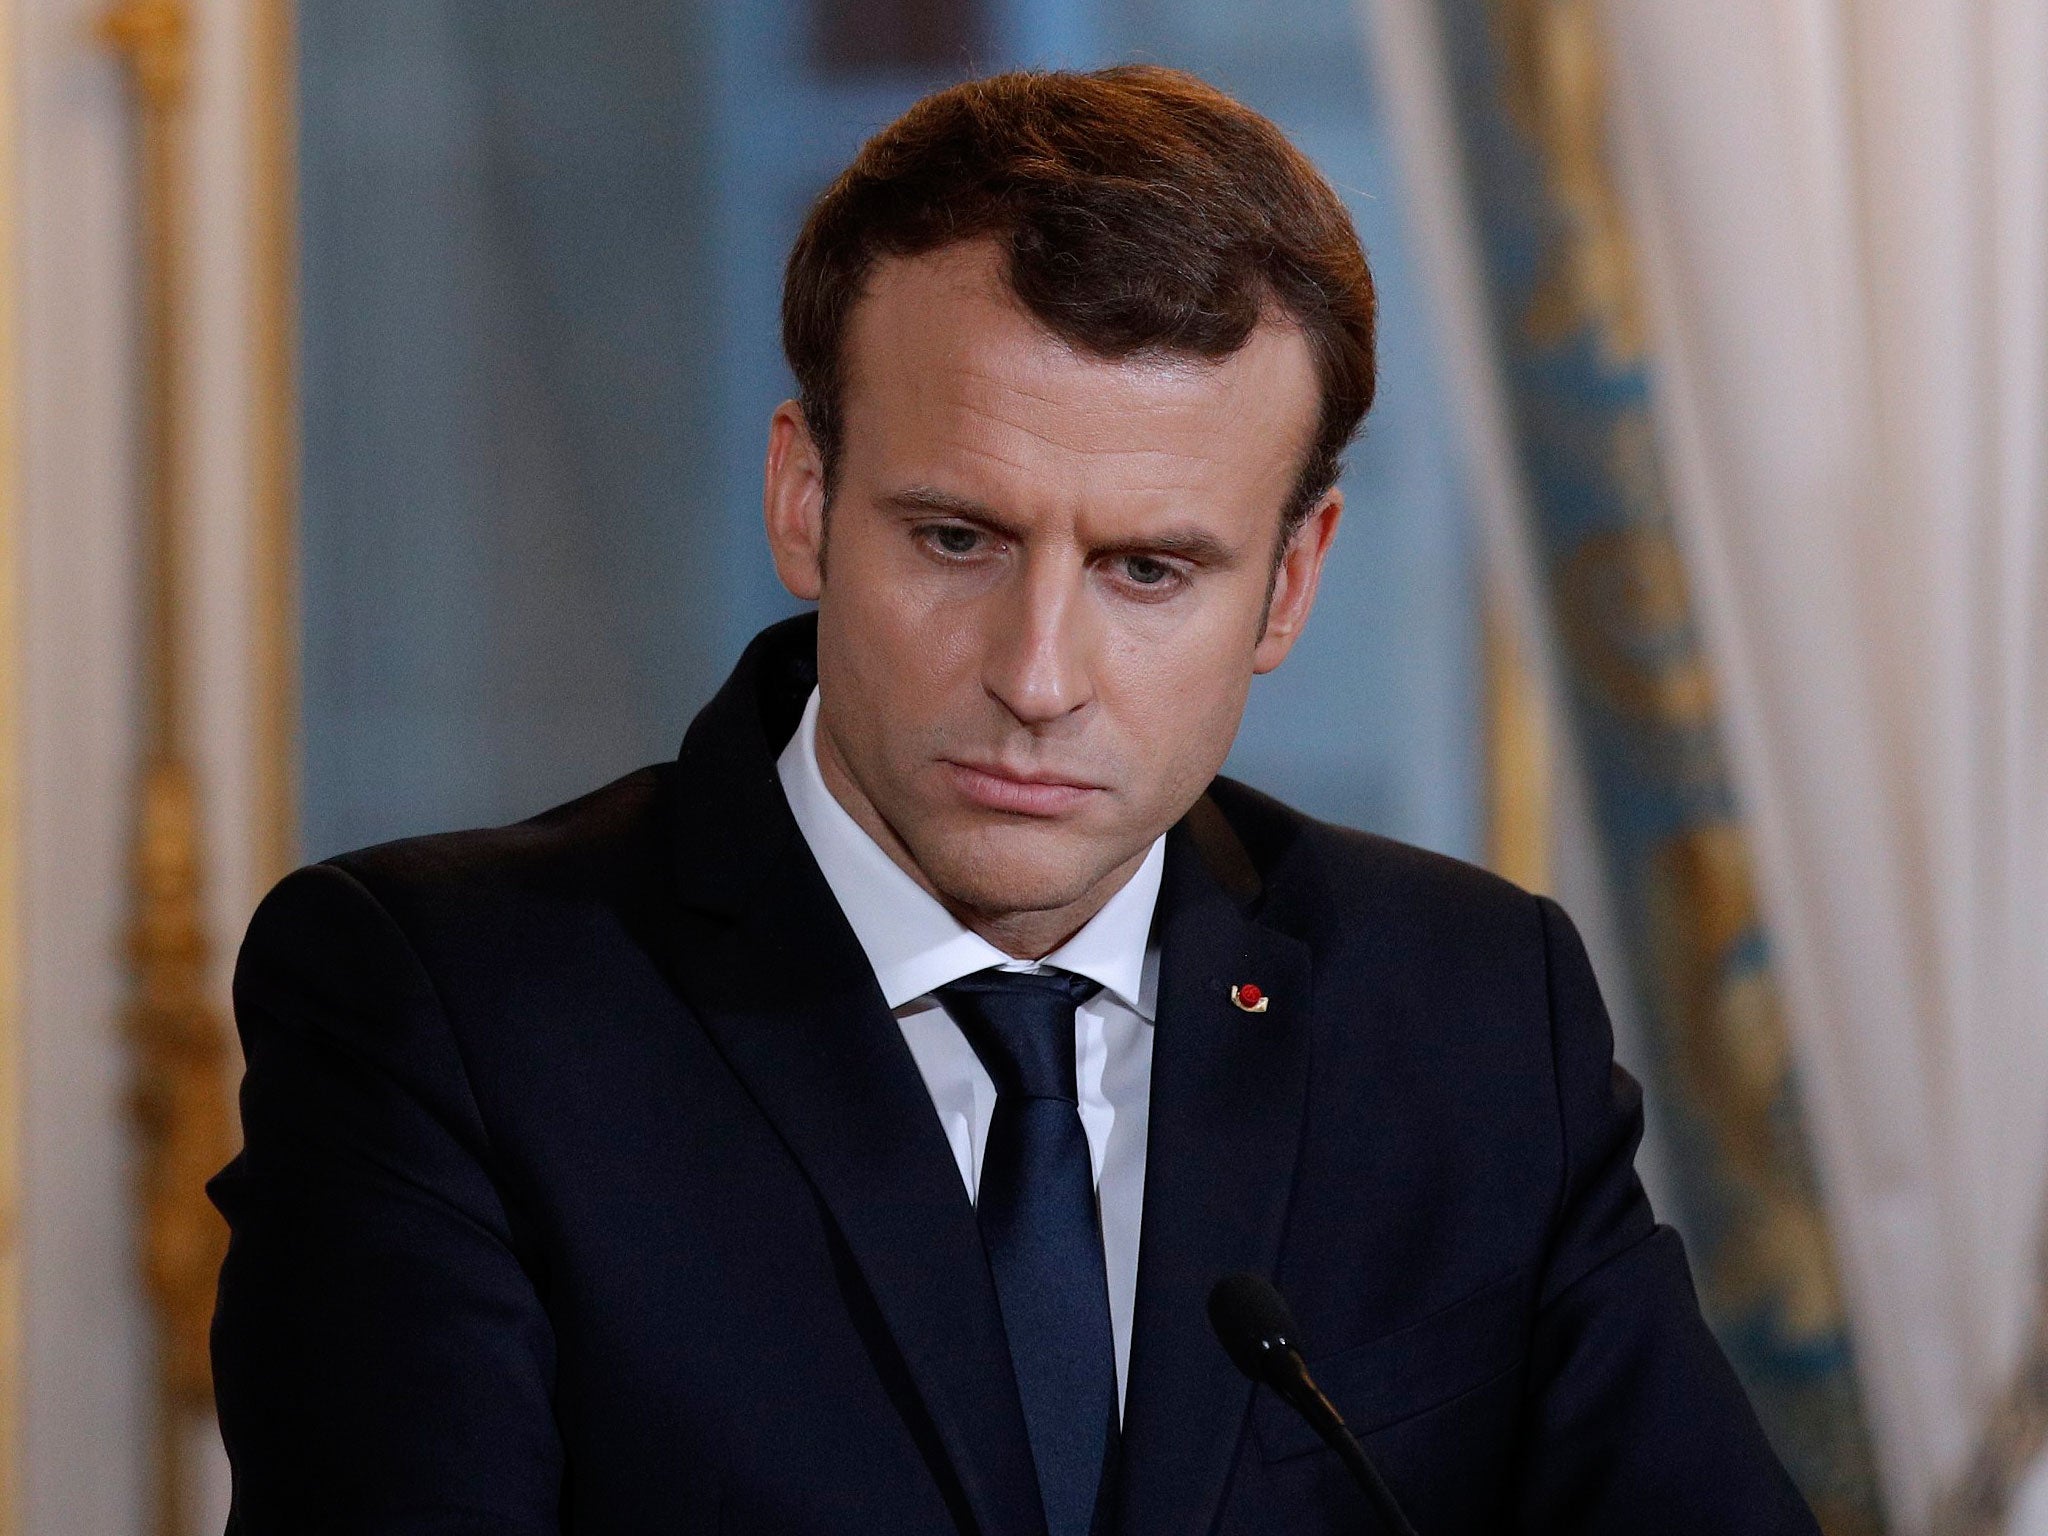 Emmanuel Macron wants France to become a global leader in the fight against climate change